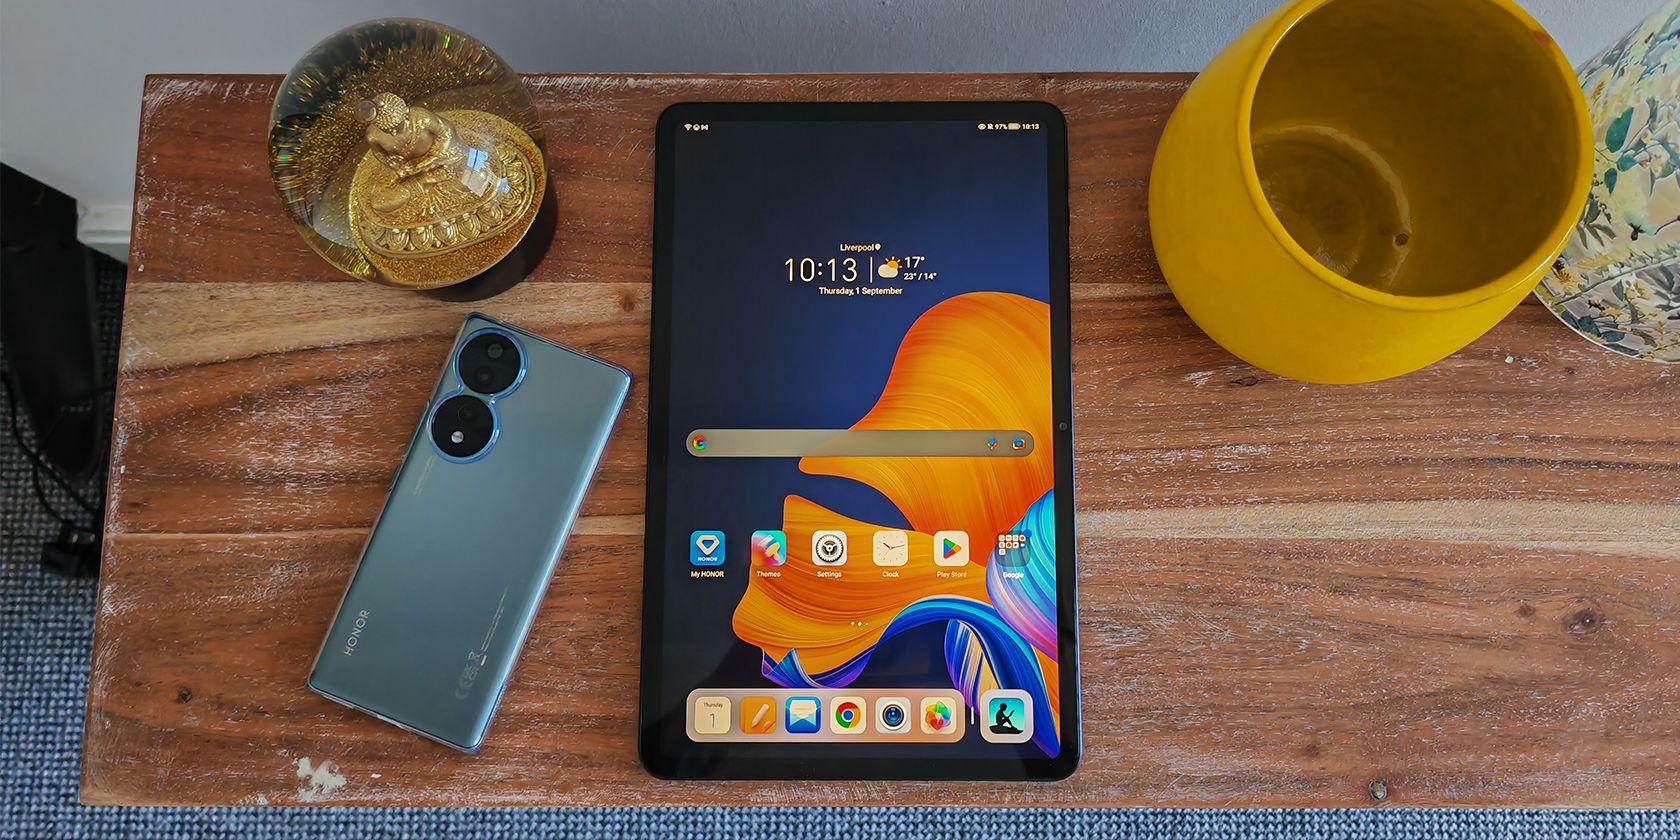 HONOR Pad 8 - Introduction, features, Performance